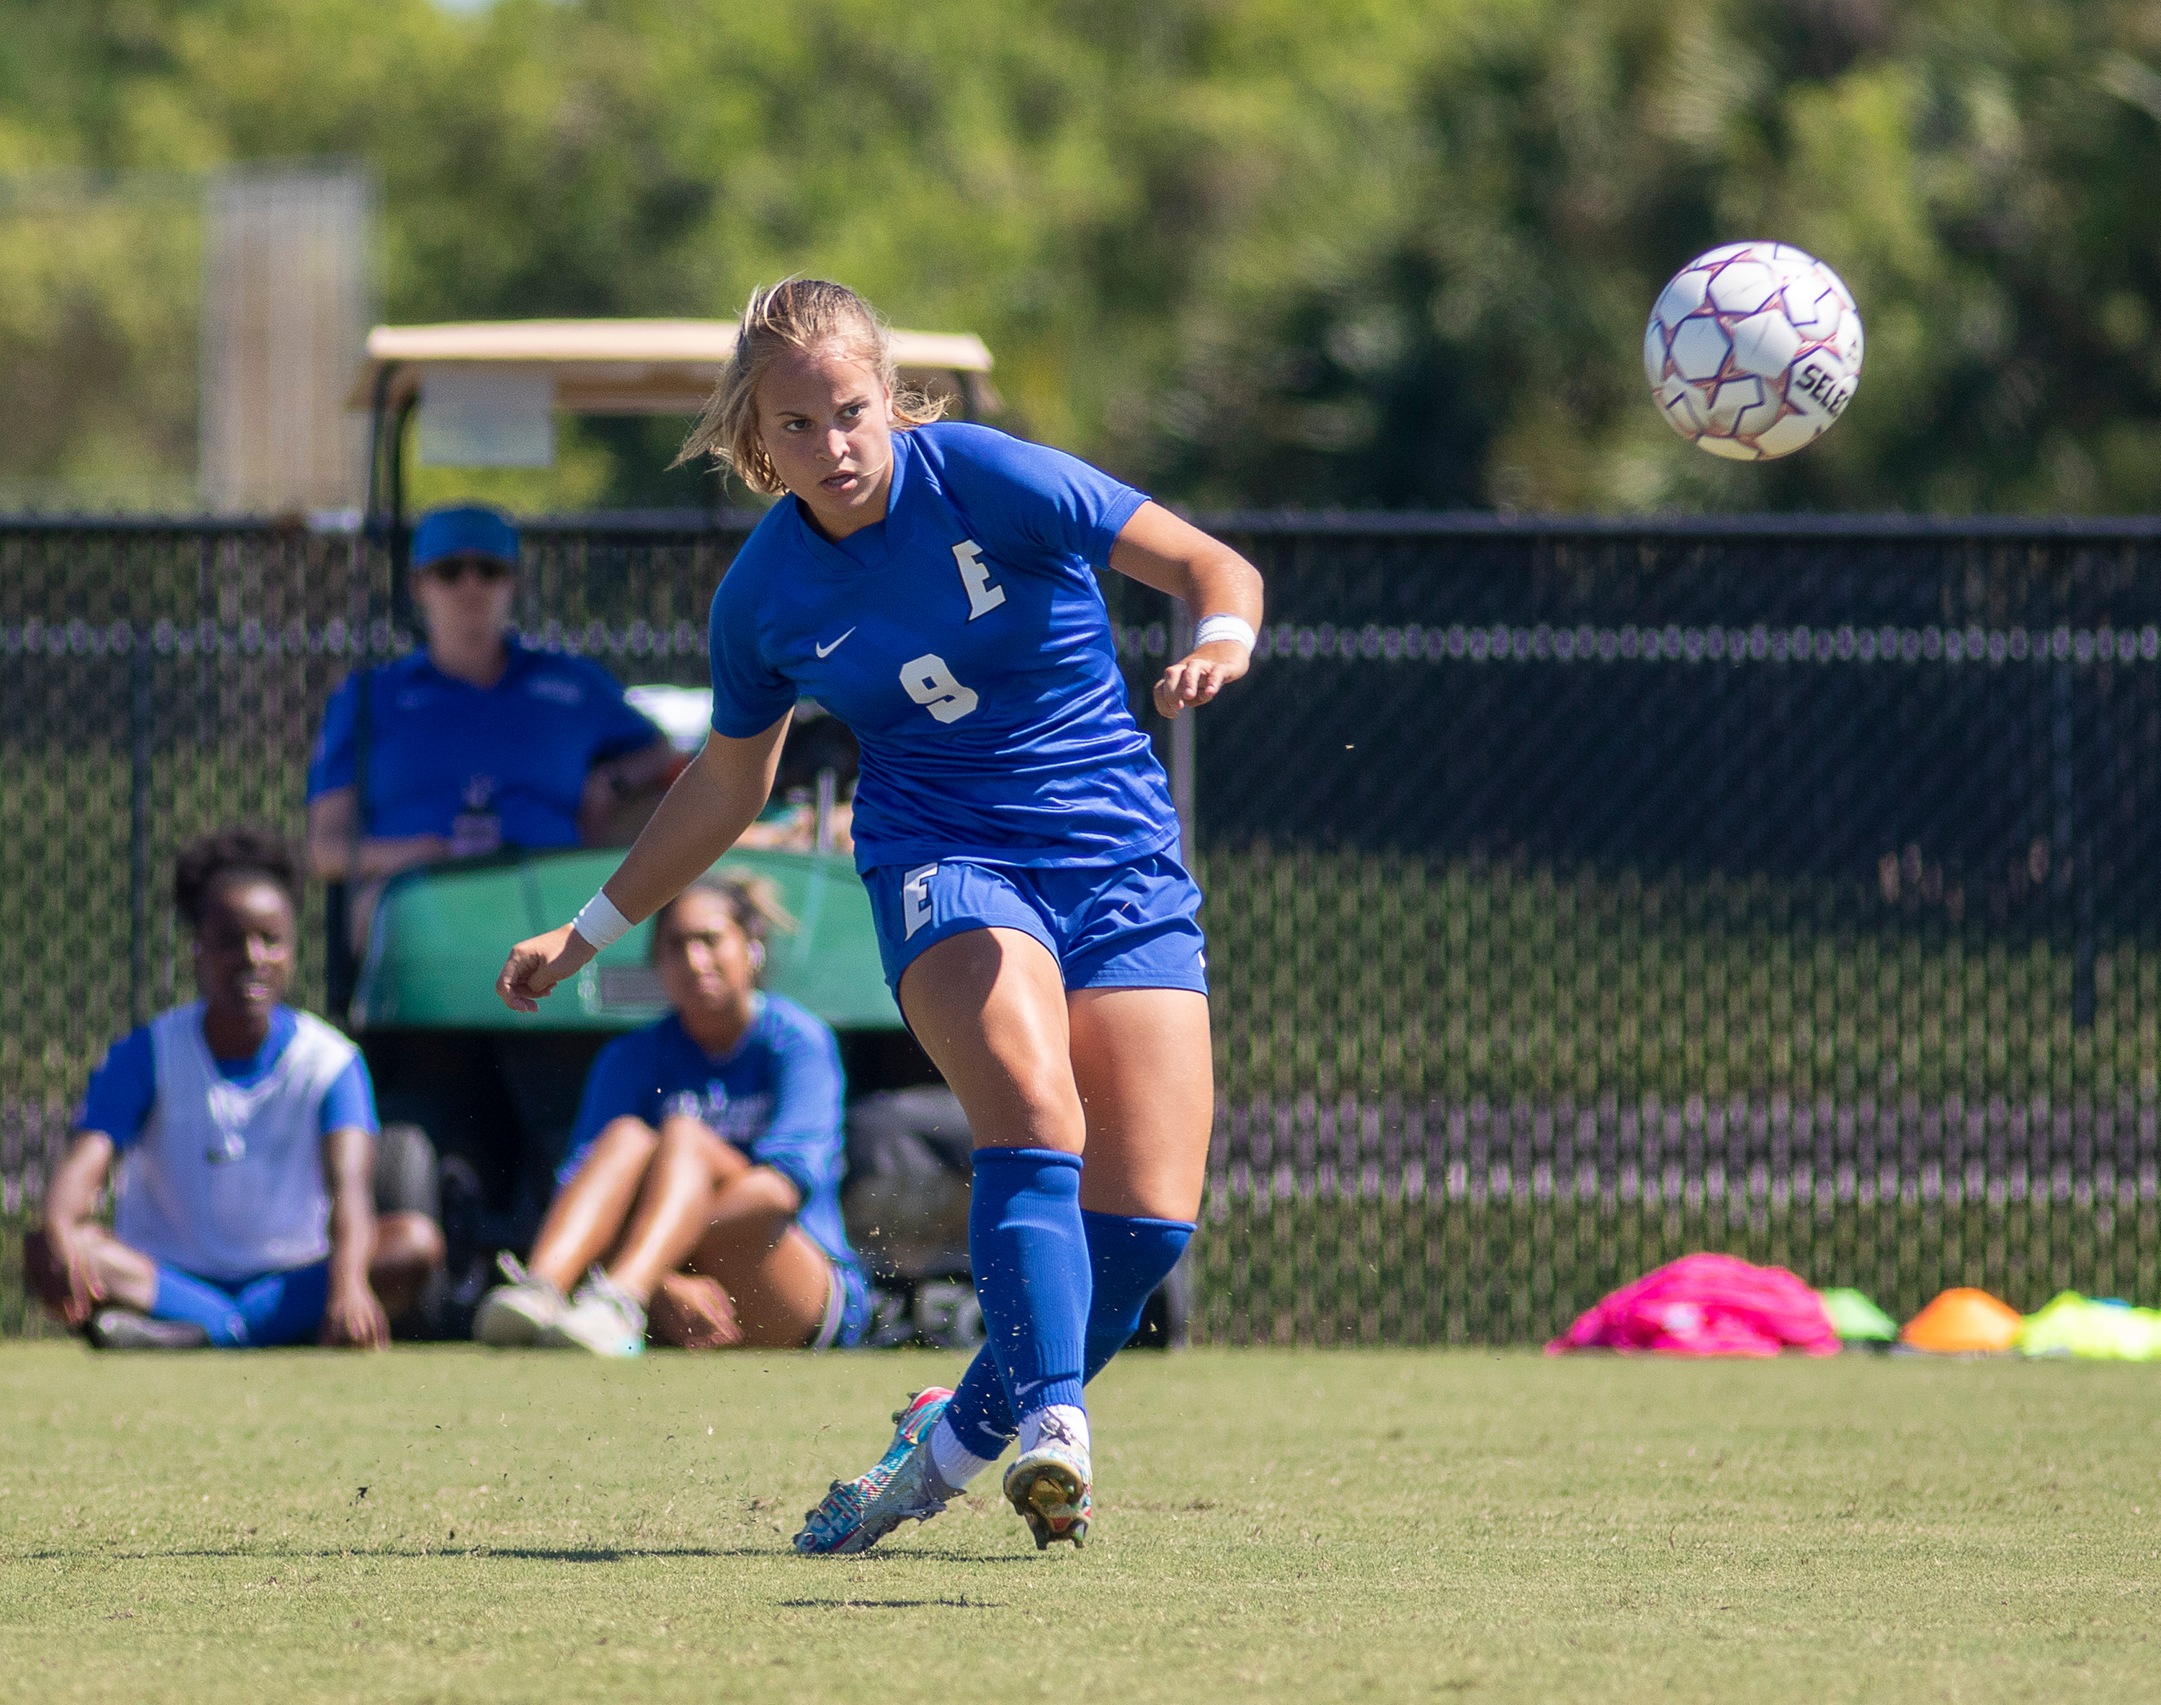 Laura Cetina named to NJCAA Division I All-America First Team